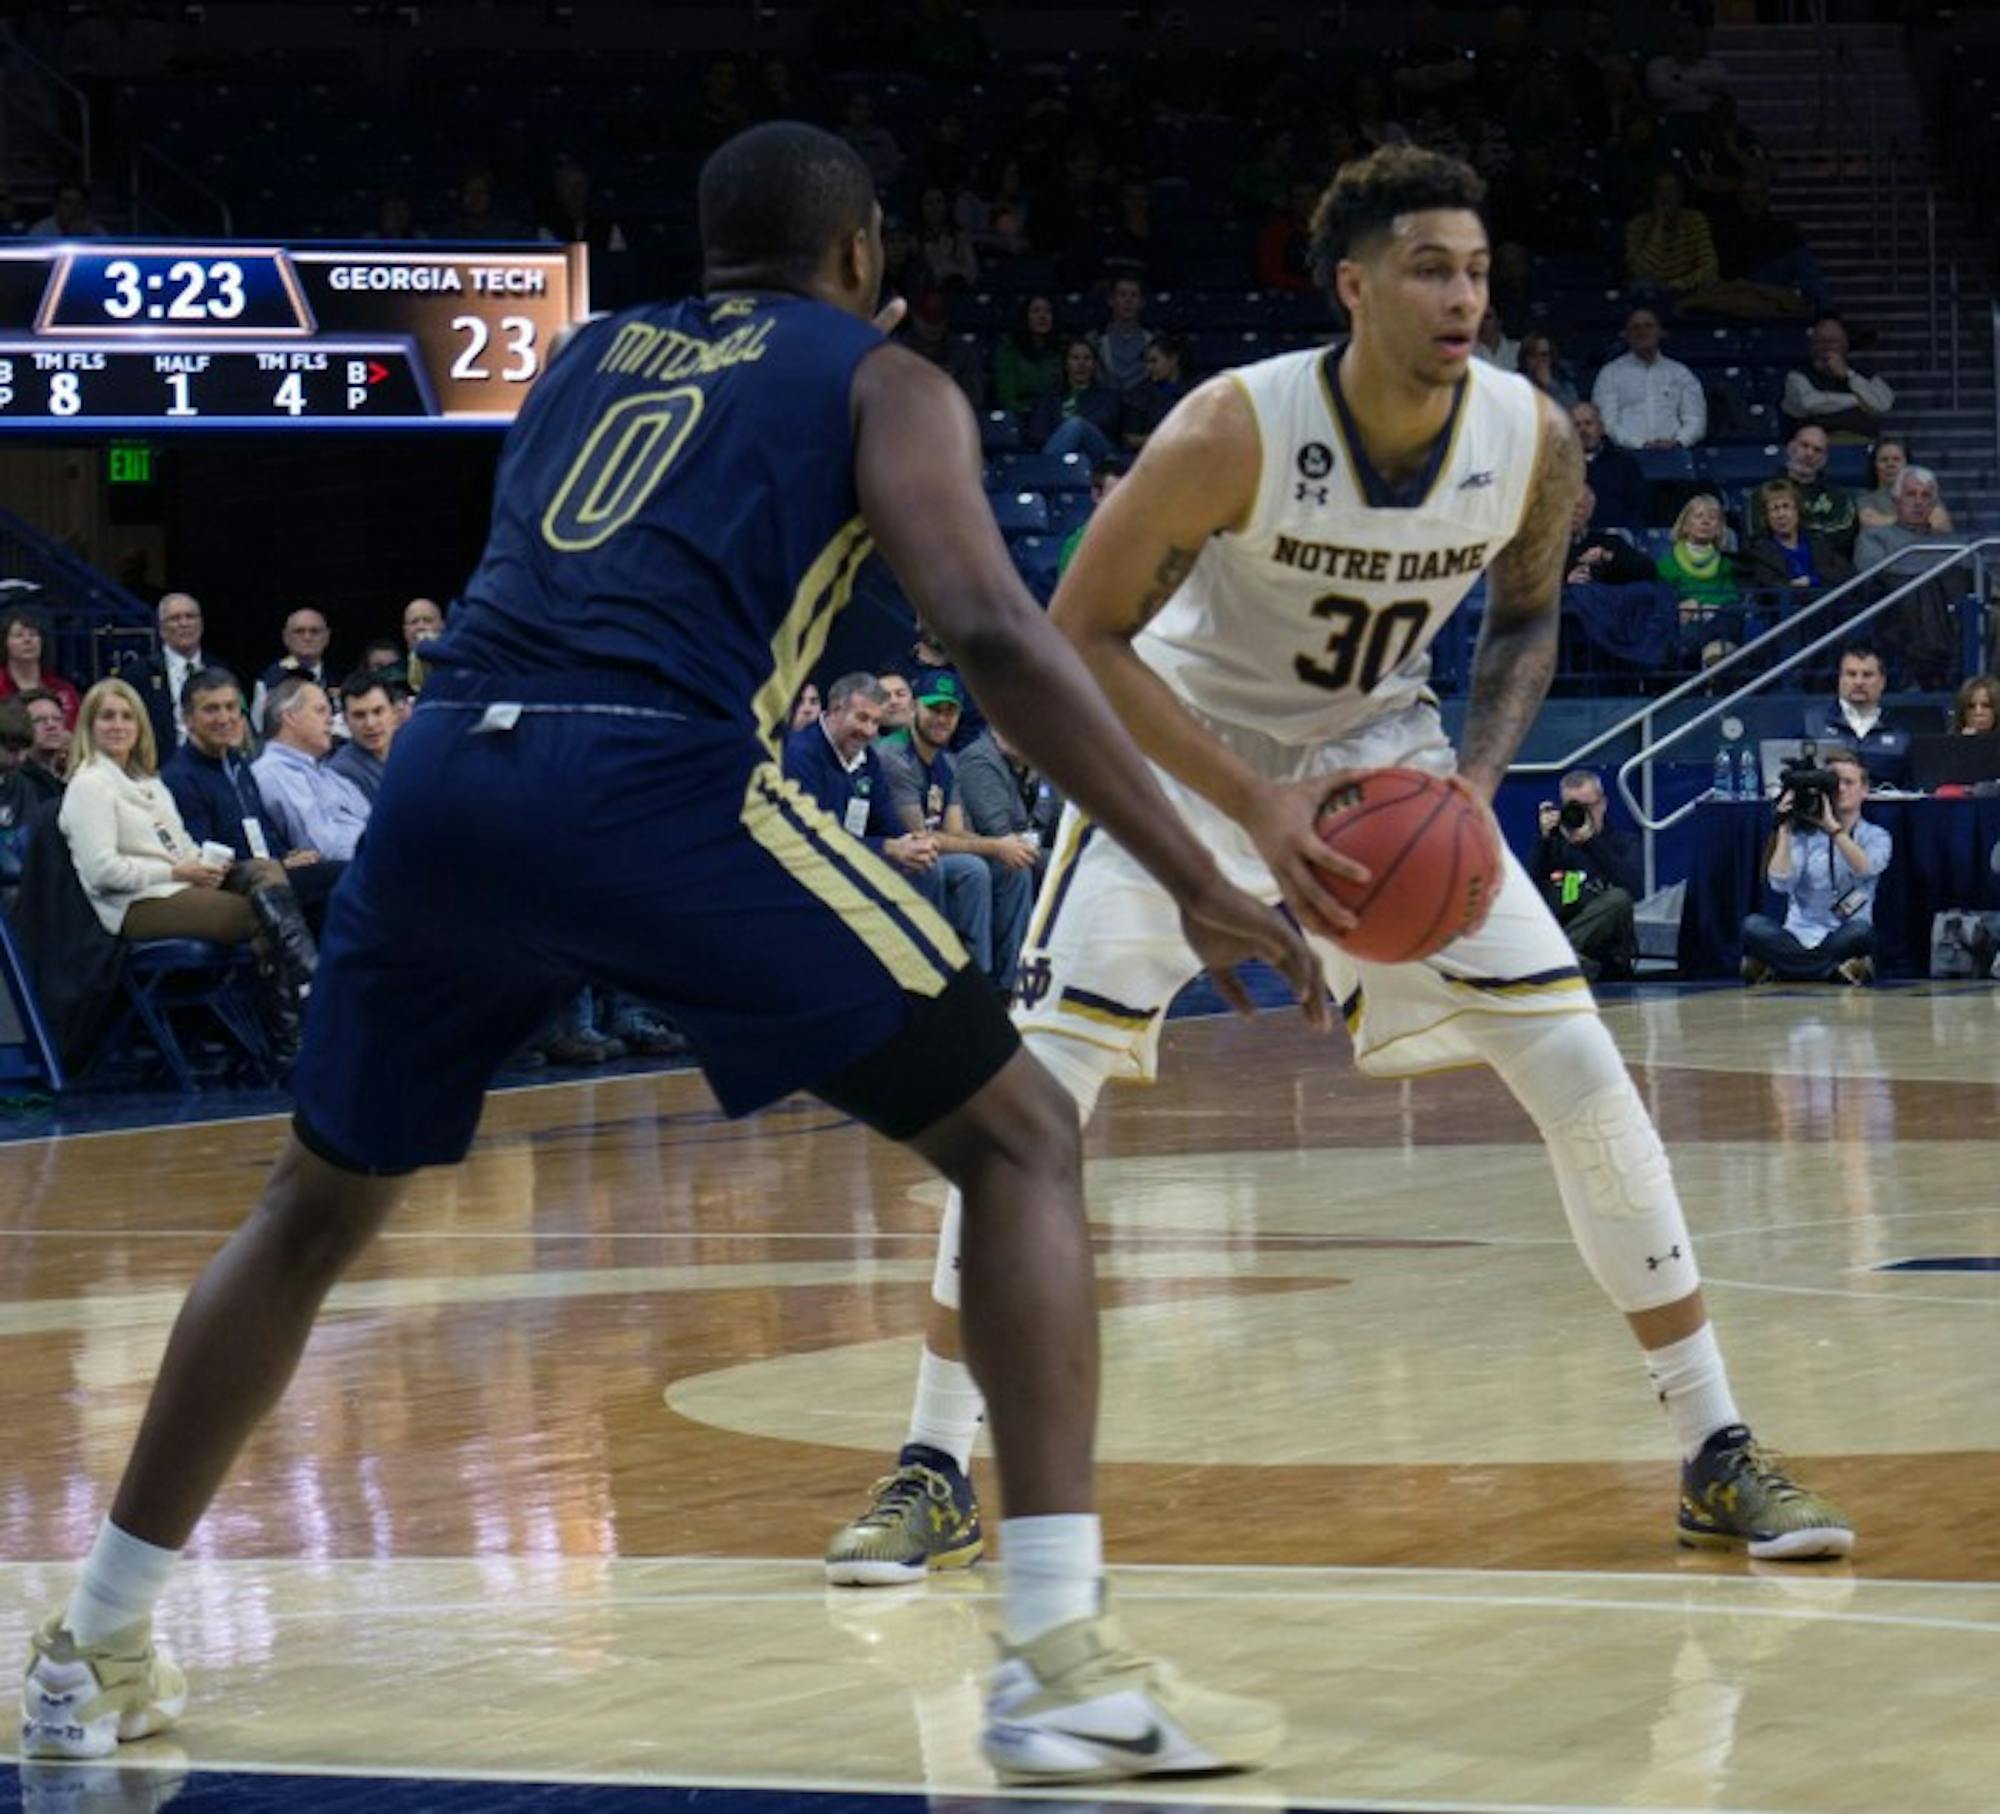 Senior forward Zach Auguste looks to pass during Notre Dame’s 72-64 victory over Georgia Tech on Wednesday at Purcell Pavilion.  Auguste led the team with 24 points and nine rebounds.